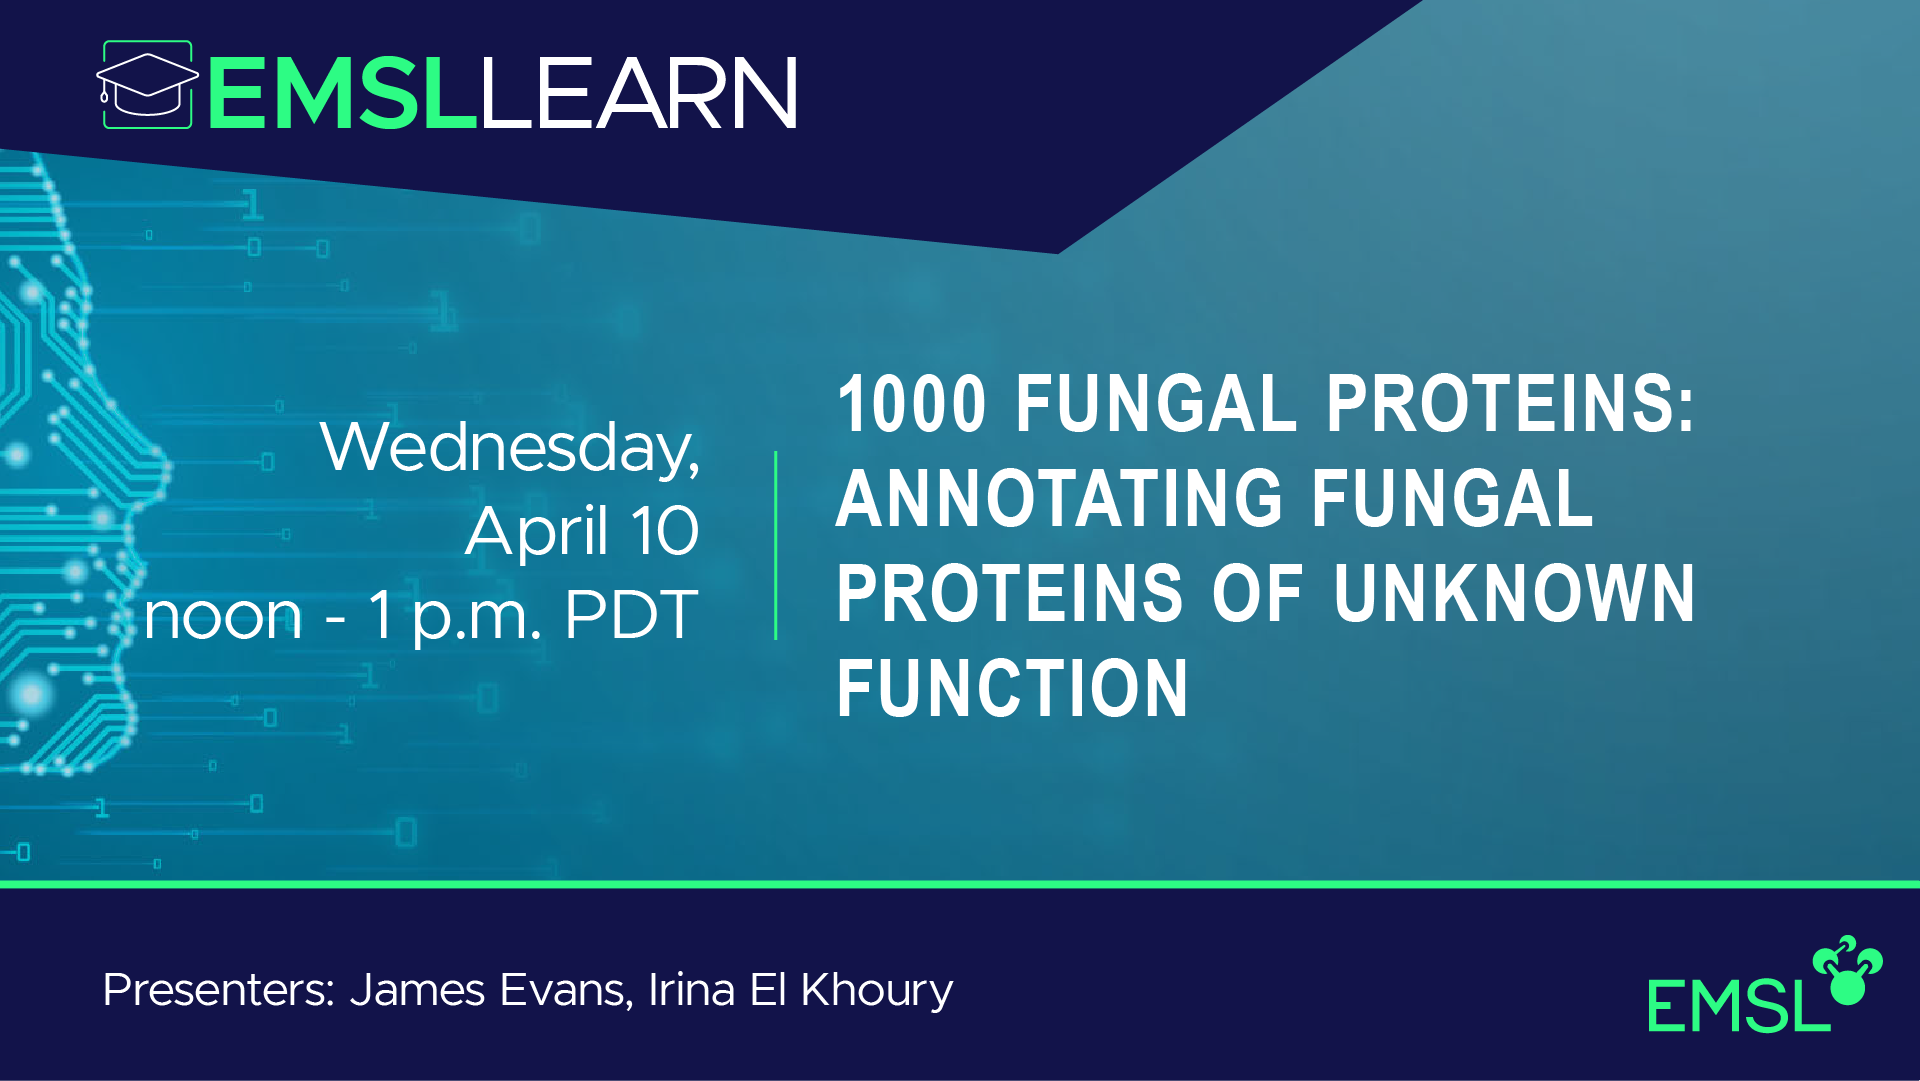 EMSL LEARN, 1000 Fungal Proteins: Annotating Fungal Proteins of Unknown Function, Wednesday, April 10, noon to 1 p.m. PDT,  Presenters: James Evans, Irina El Khoury, EMSL logo